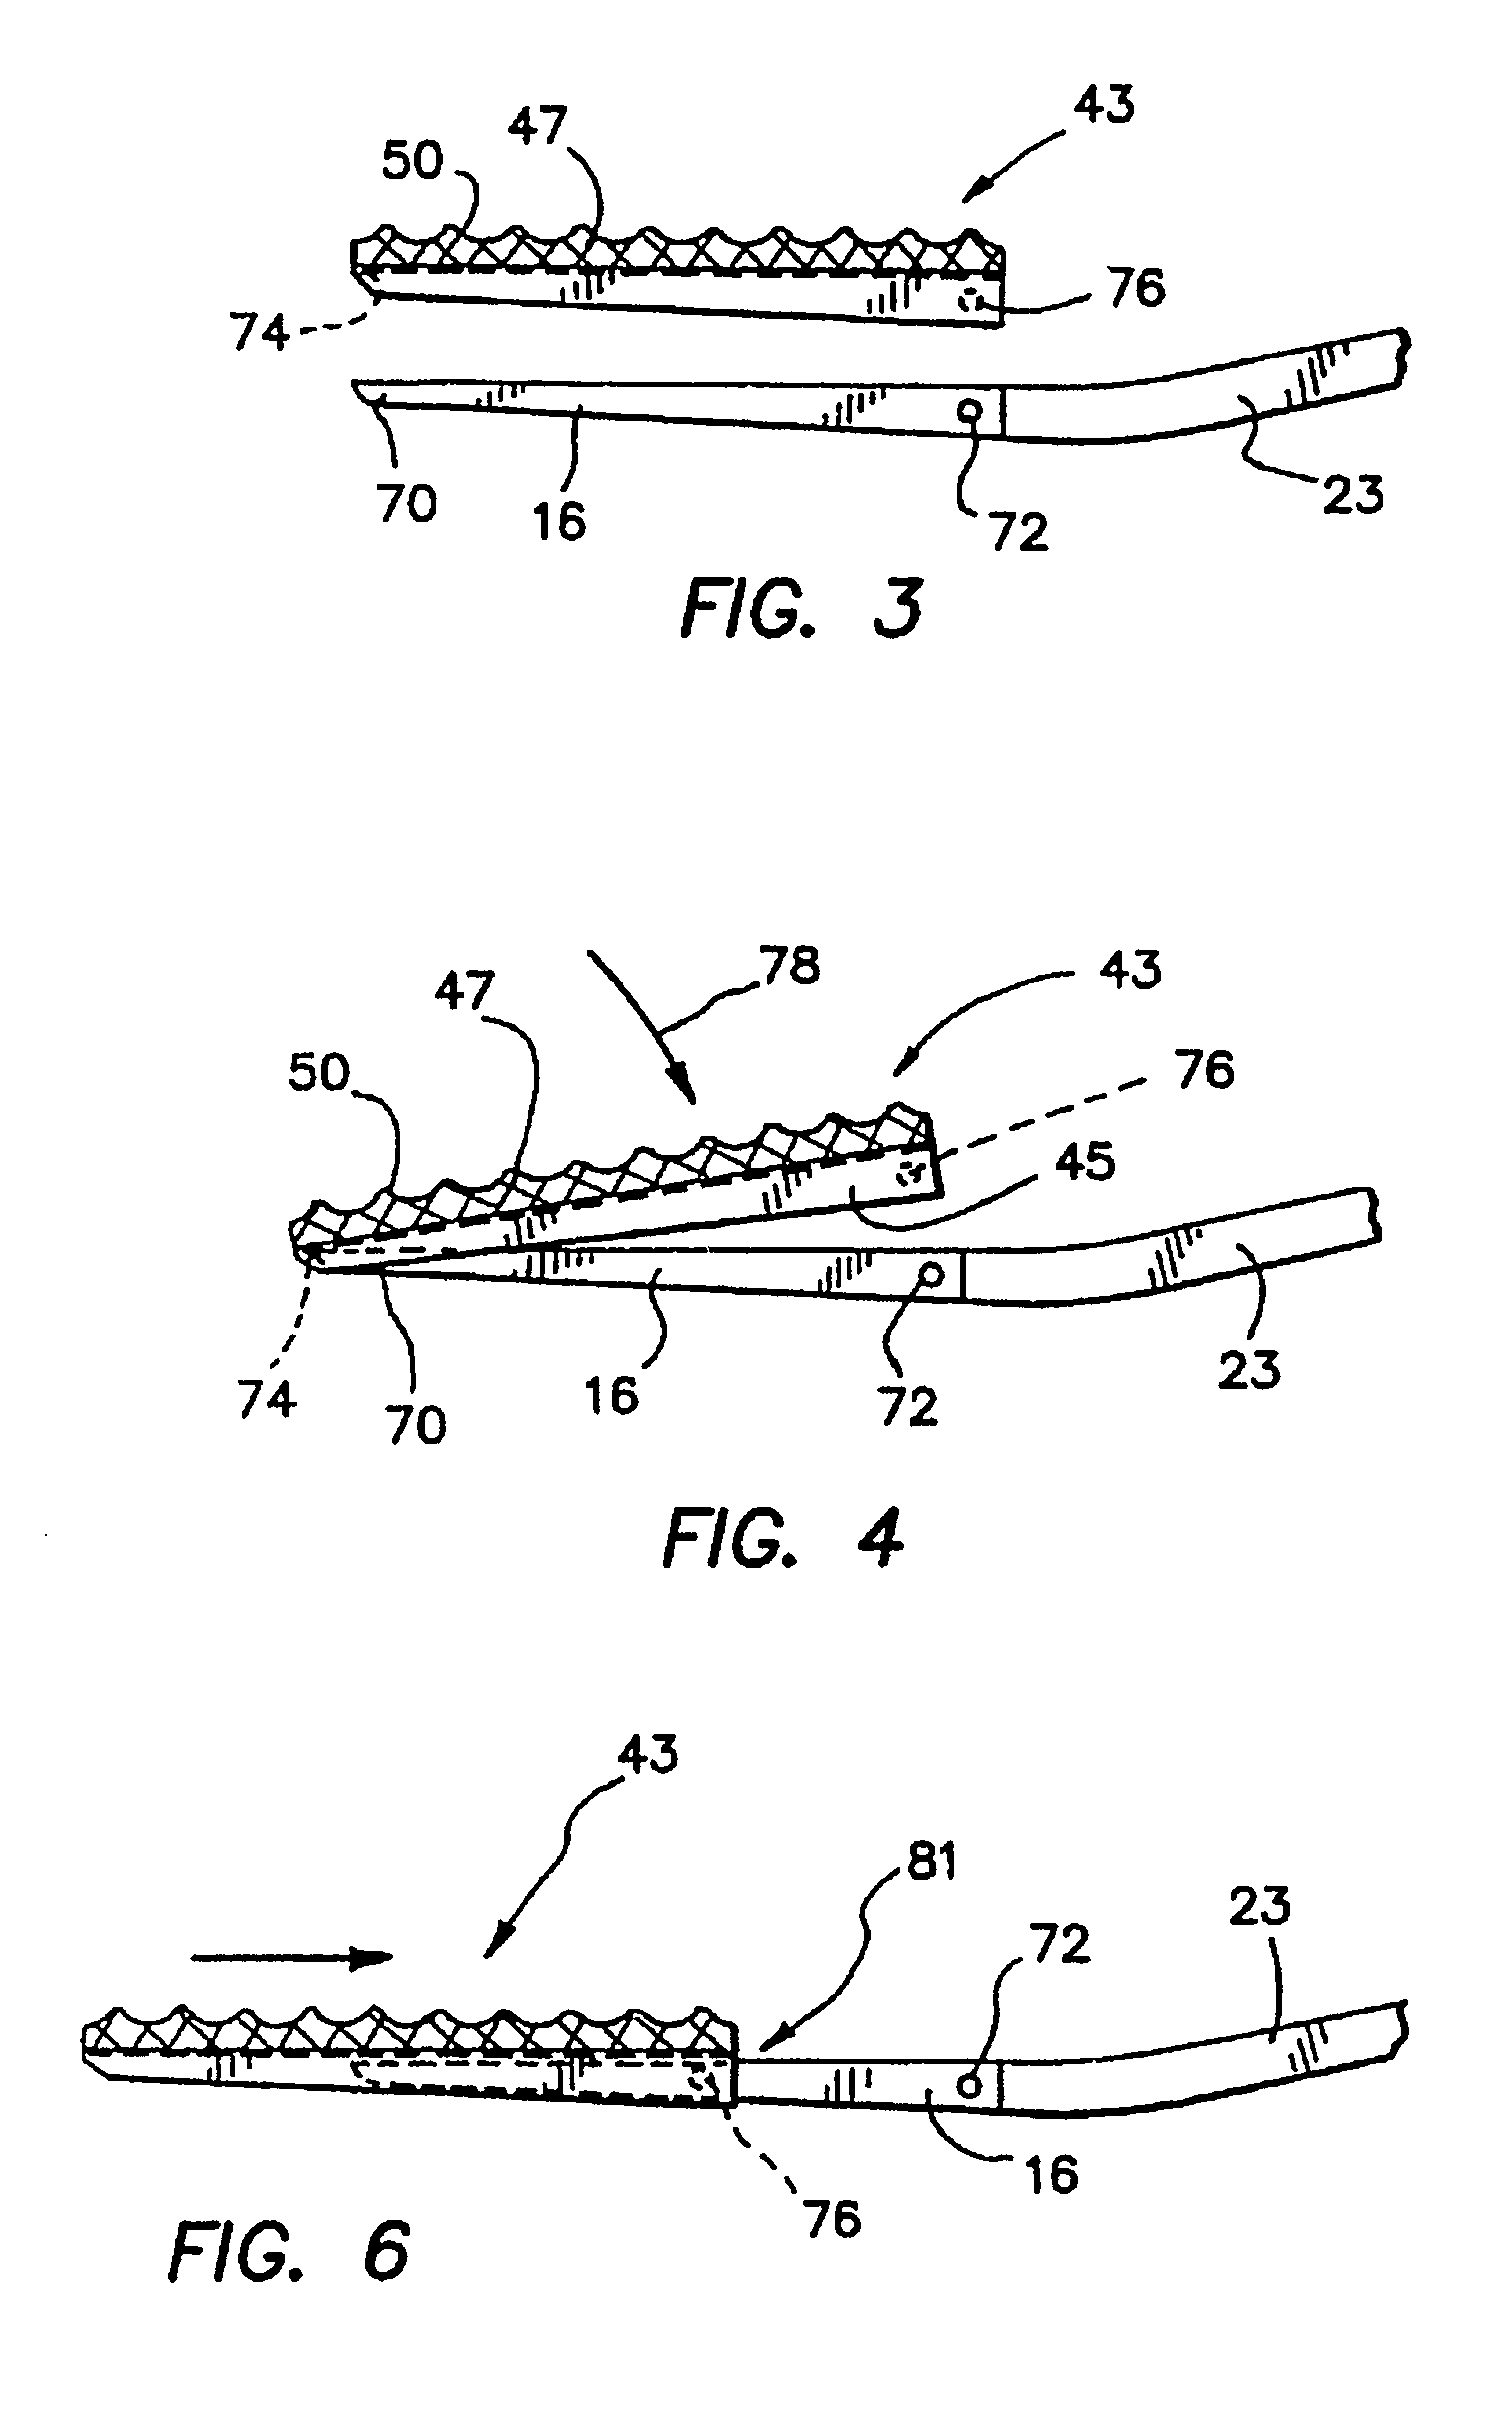 Peripheral vascular occlusion devices